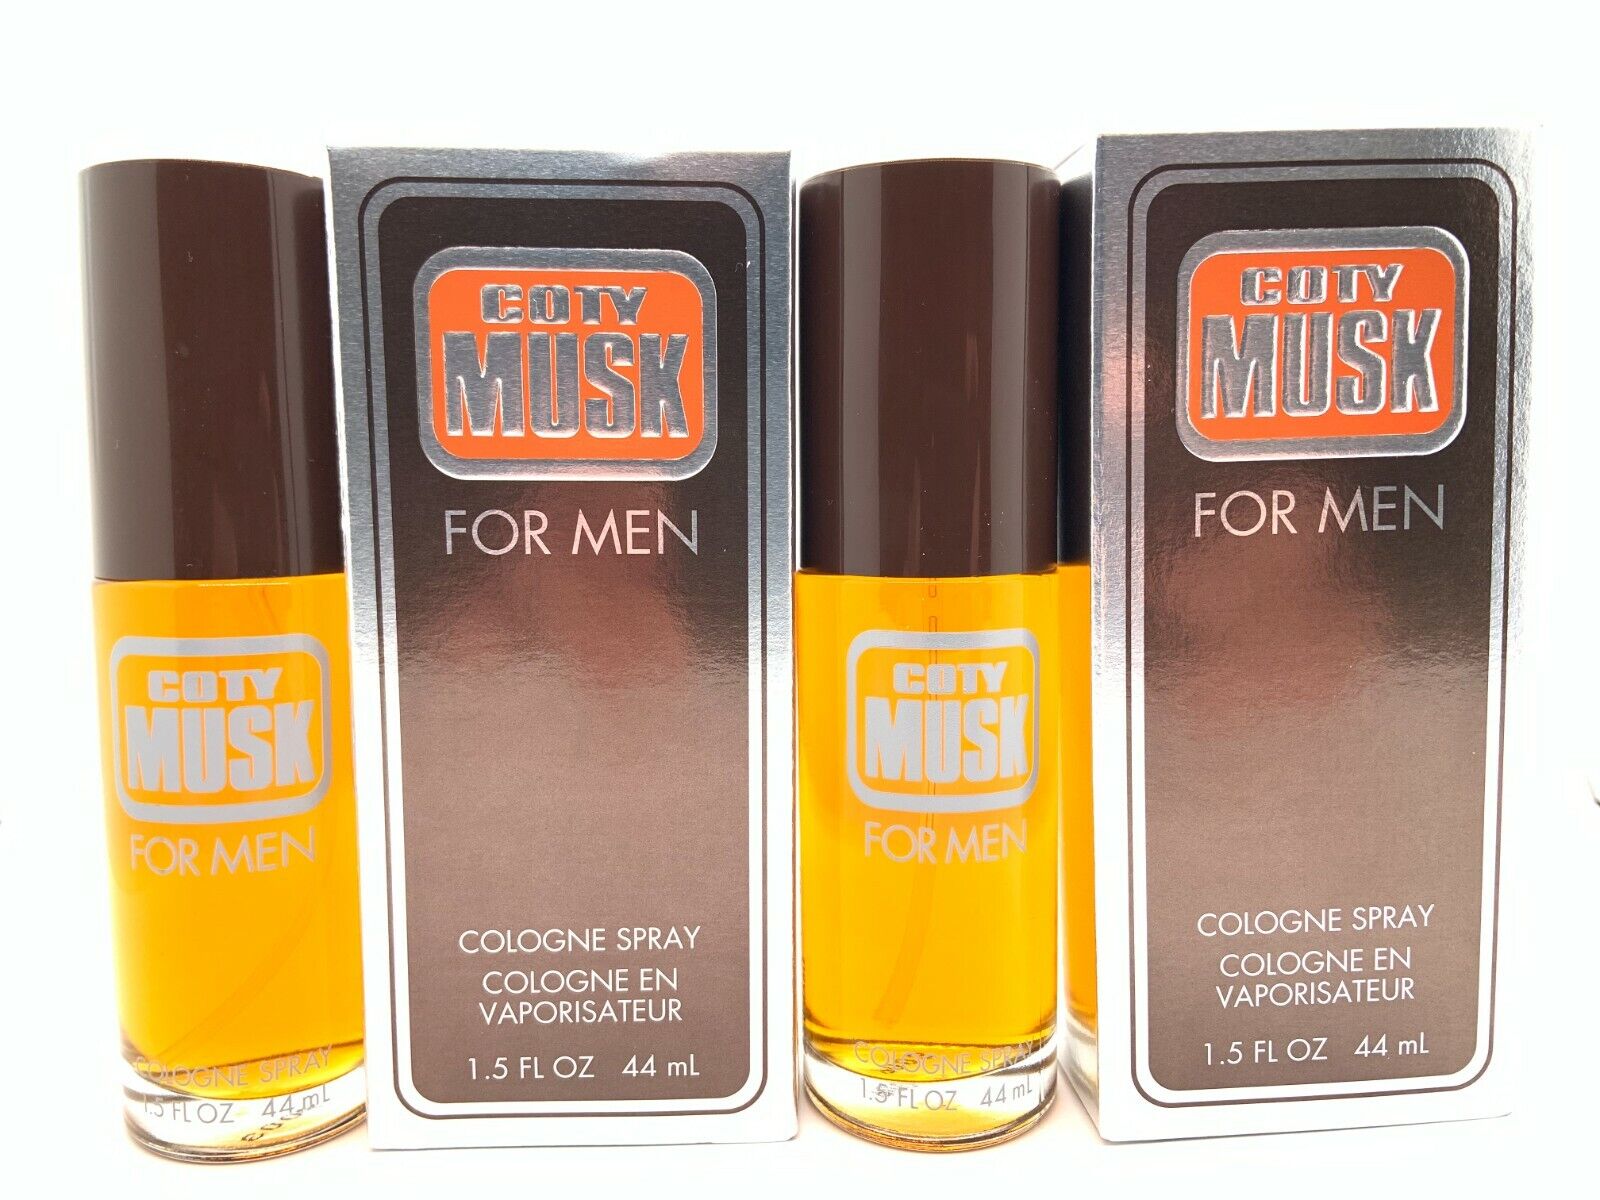 Lot of 2 Pc - Coty Musk 1.5 oz Cologne Spray, for Men Pack of 2 Pc - New in Box Coty Coty15